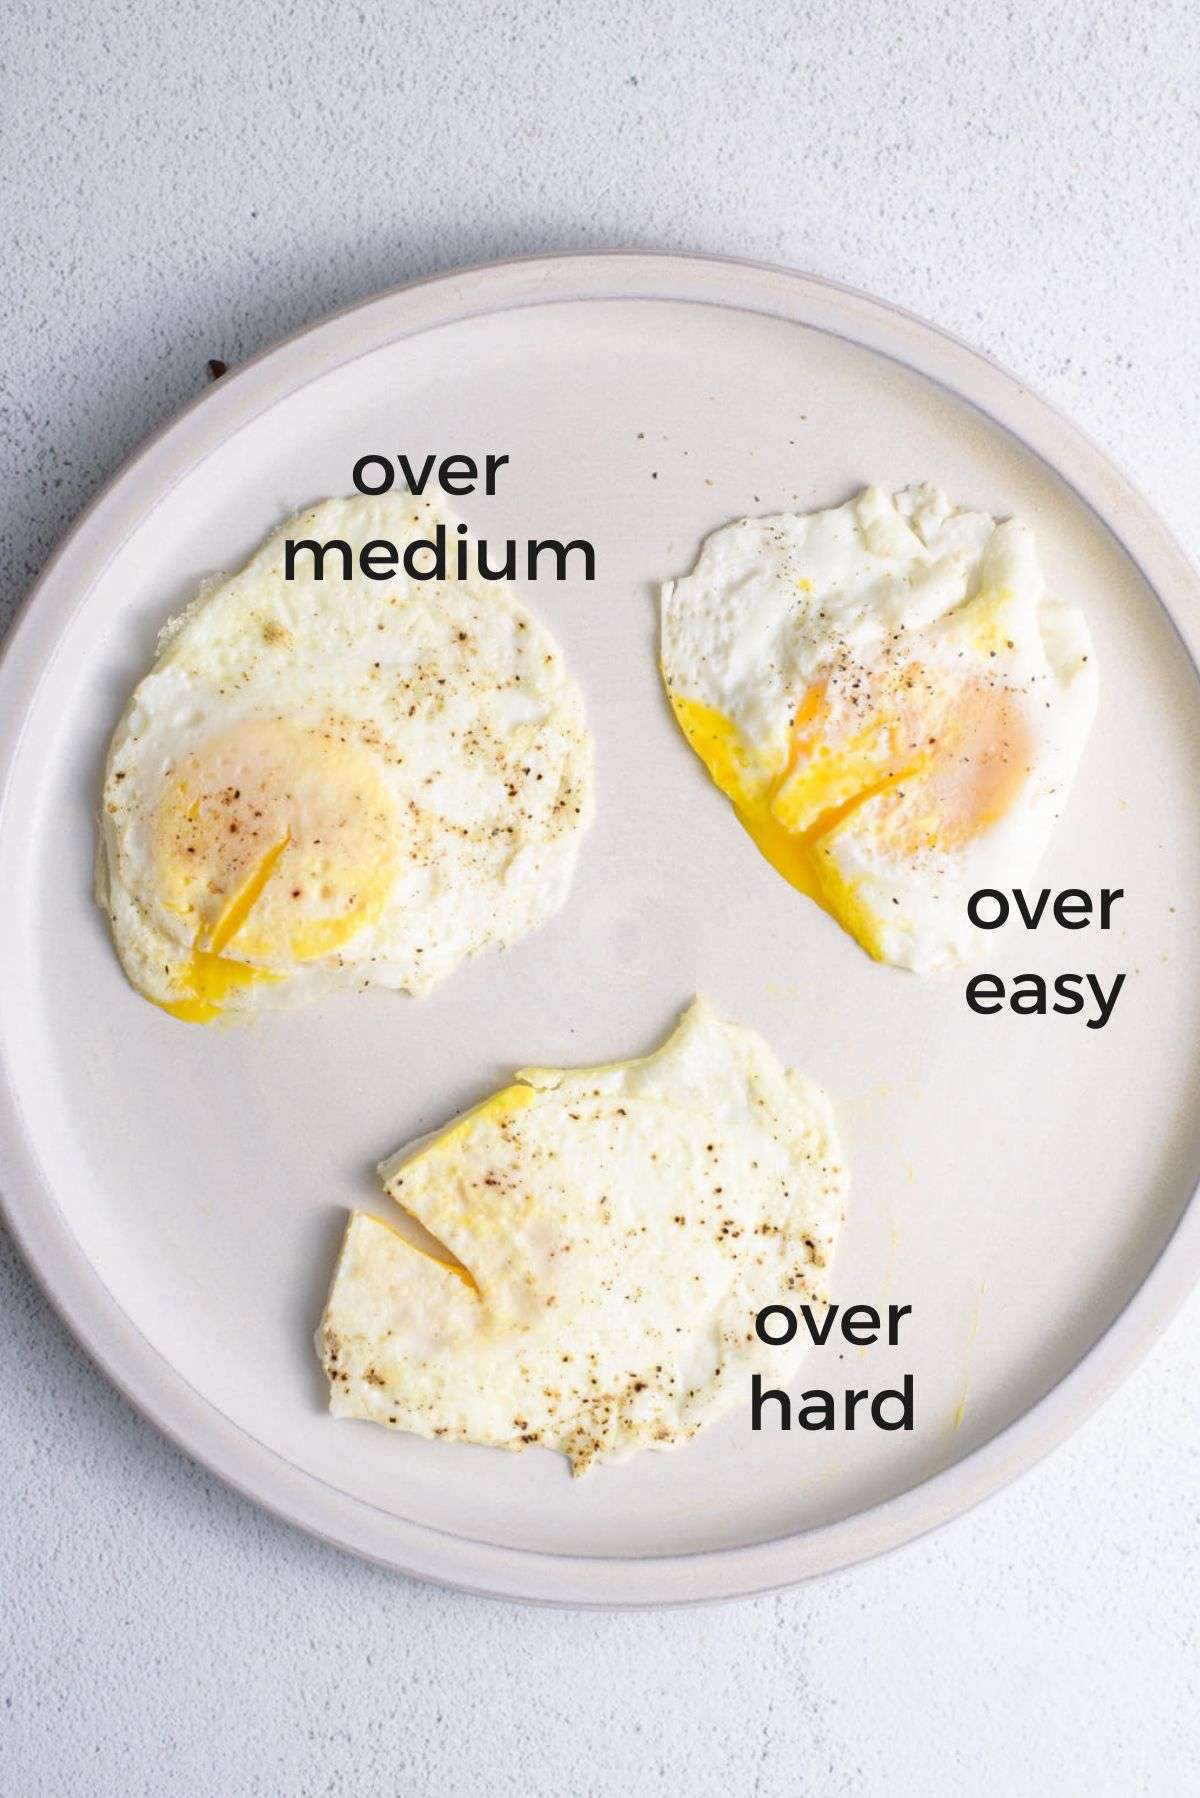 over easy, over medium, and over hard egg